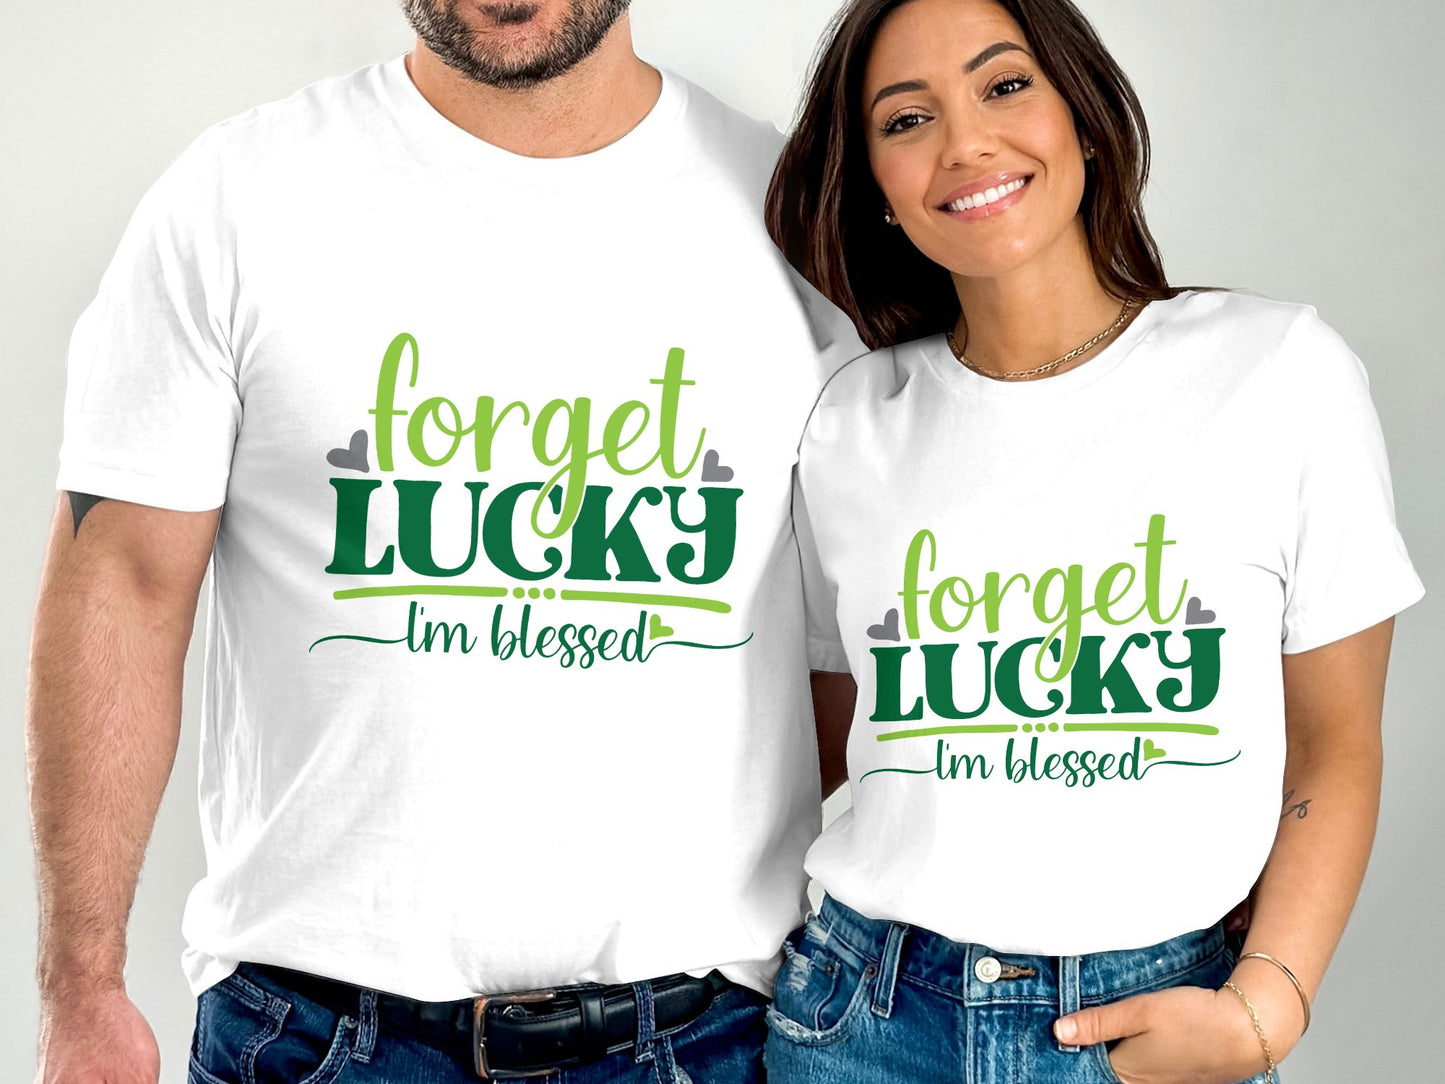 Forget Lucky I'm Blessed (St. Patrick's Day T-shirt)